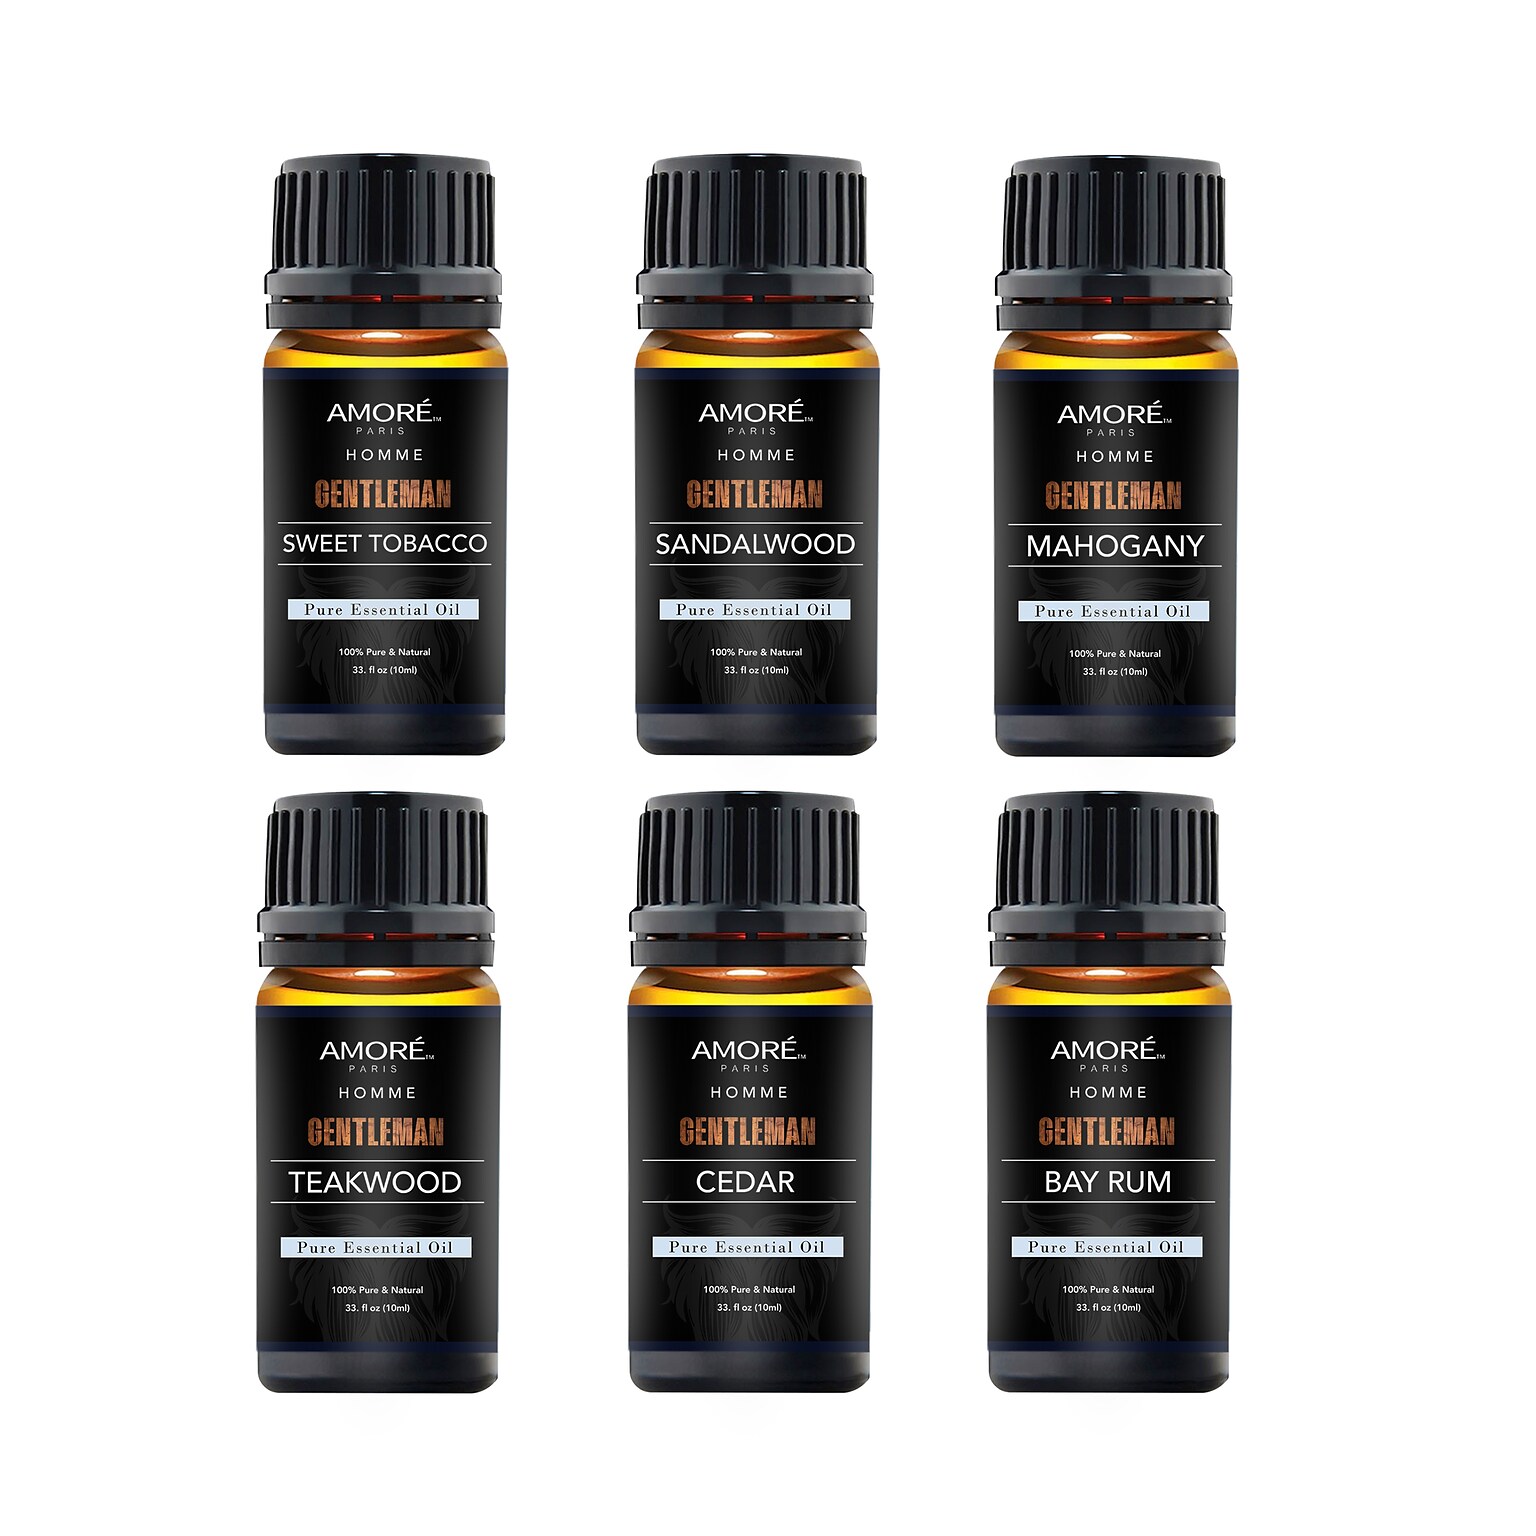 Extreme Fit Gentlemens Handheld Essential Oil, Assorted Scents, 10ml, 6/Set (AM-6ANKEOS)